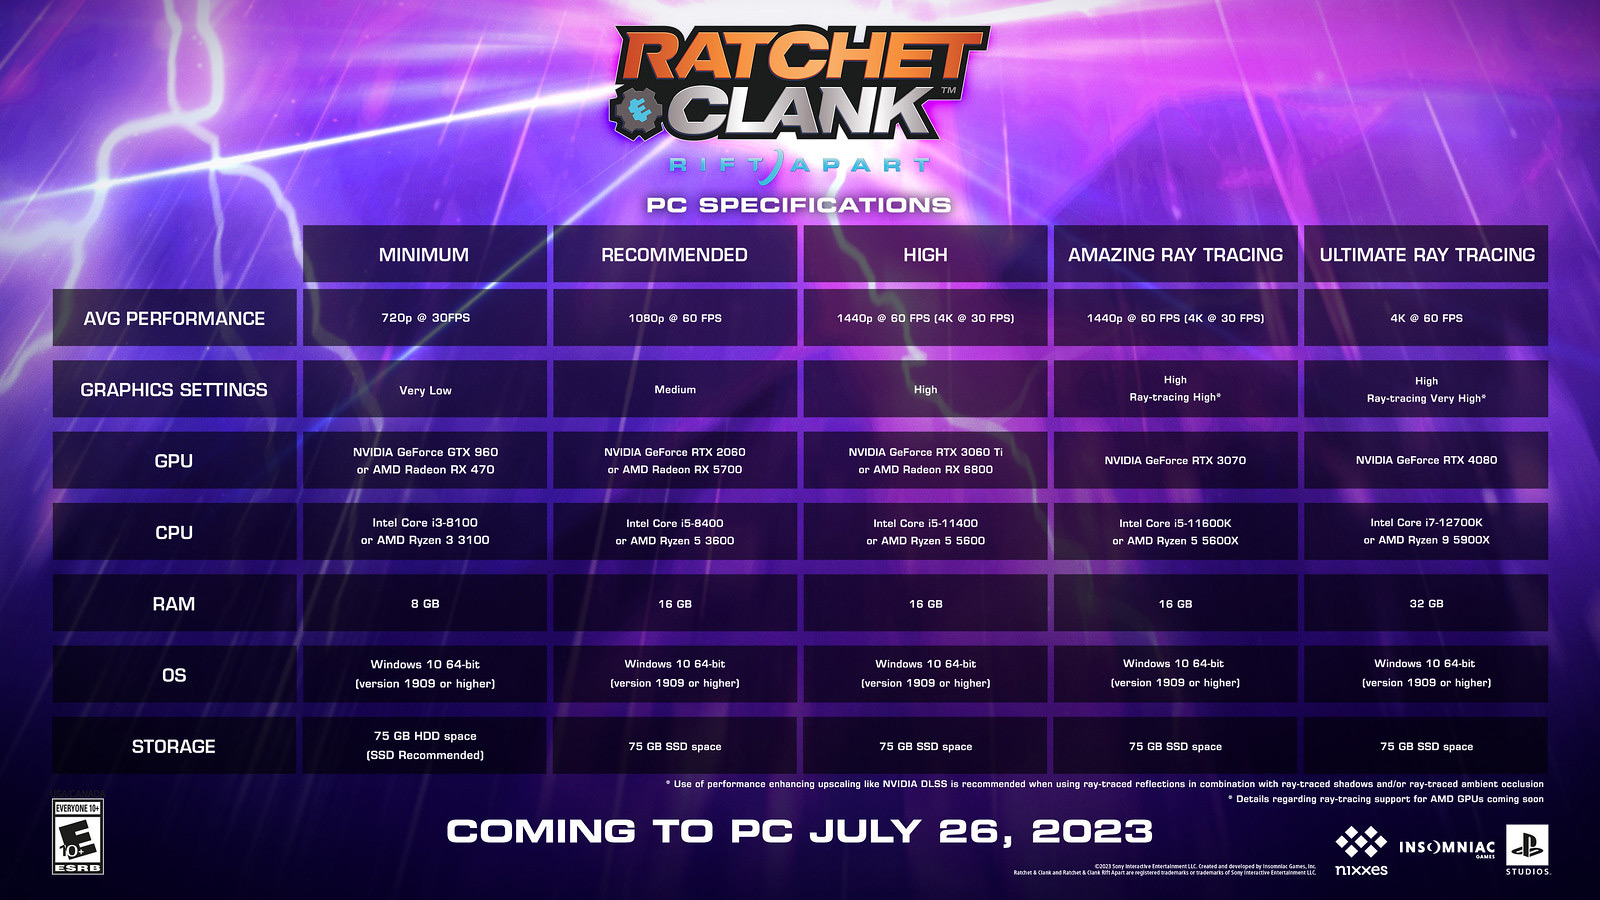 Here are the PC specifications for Ratchet & Clank: Rift Apart